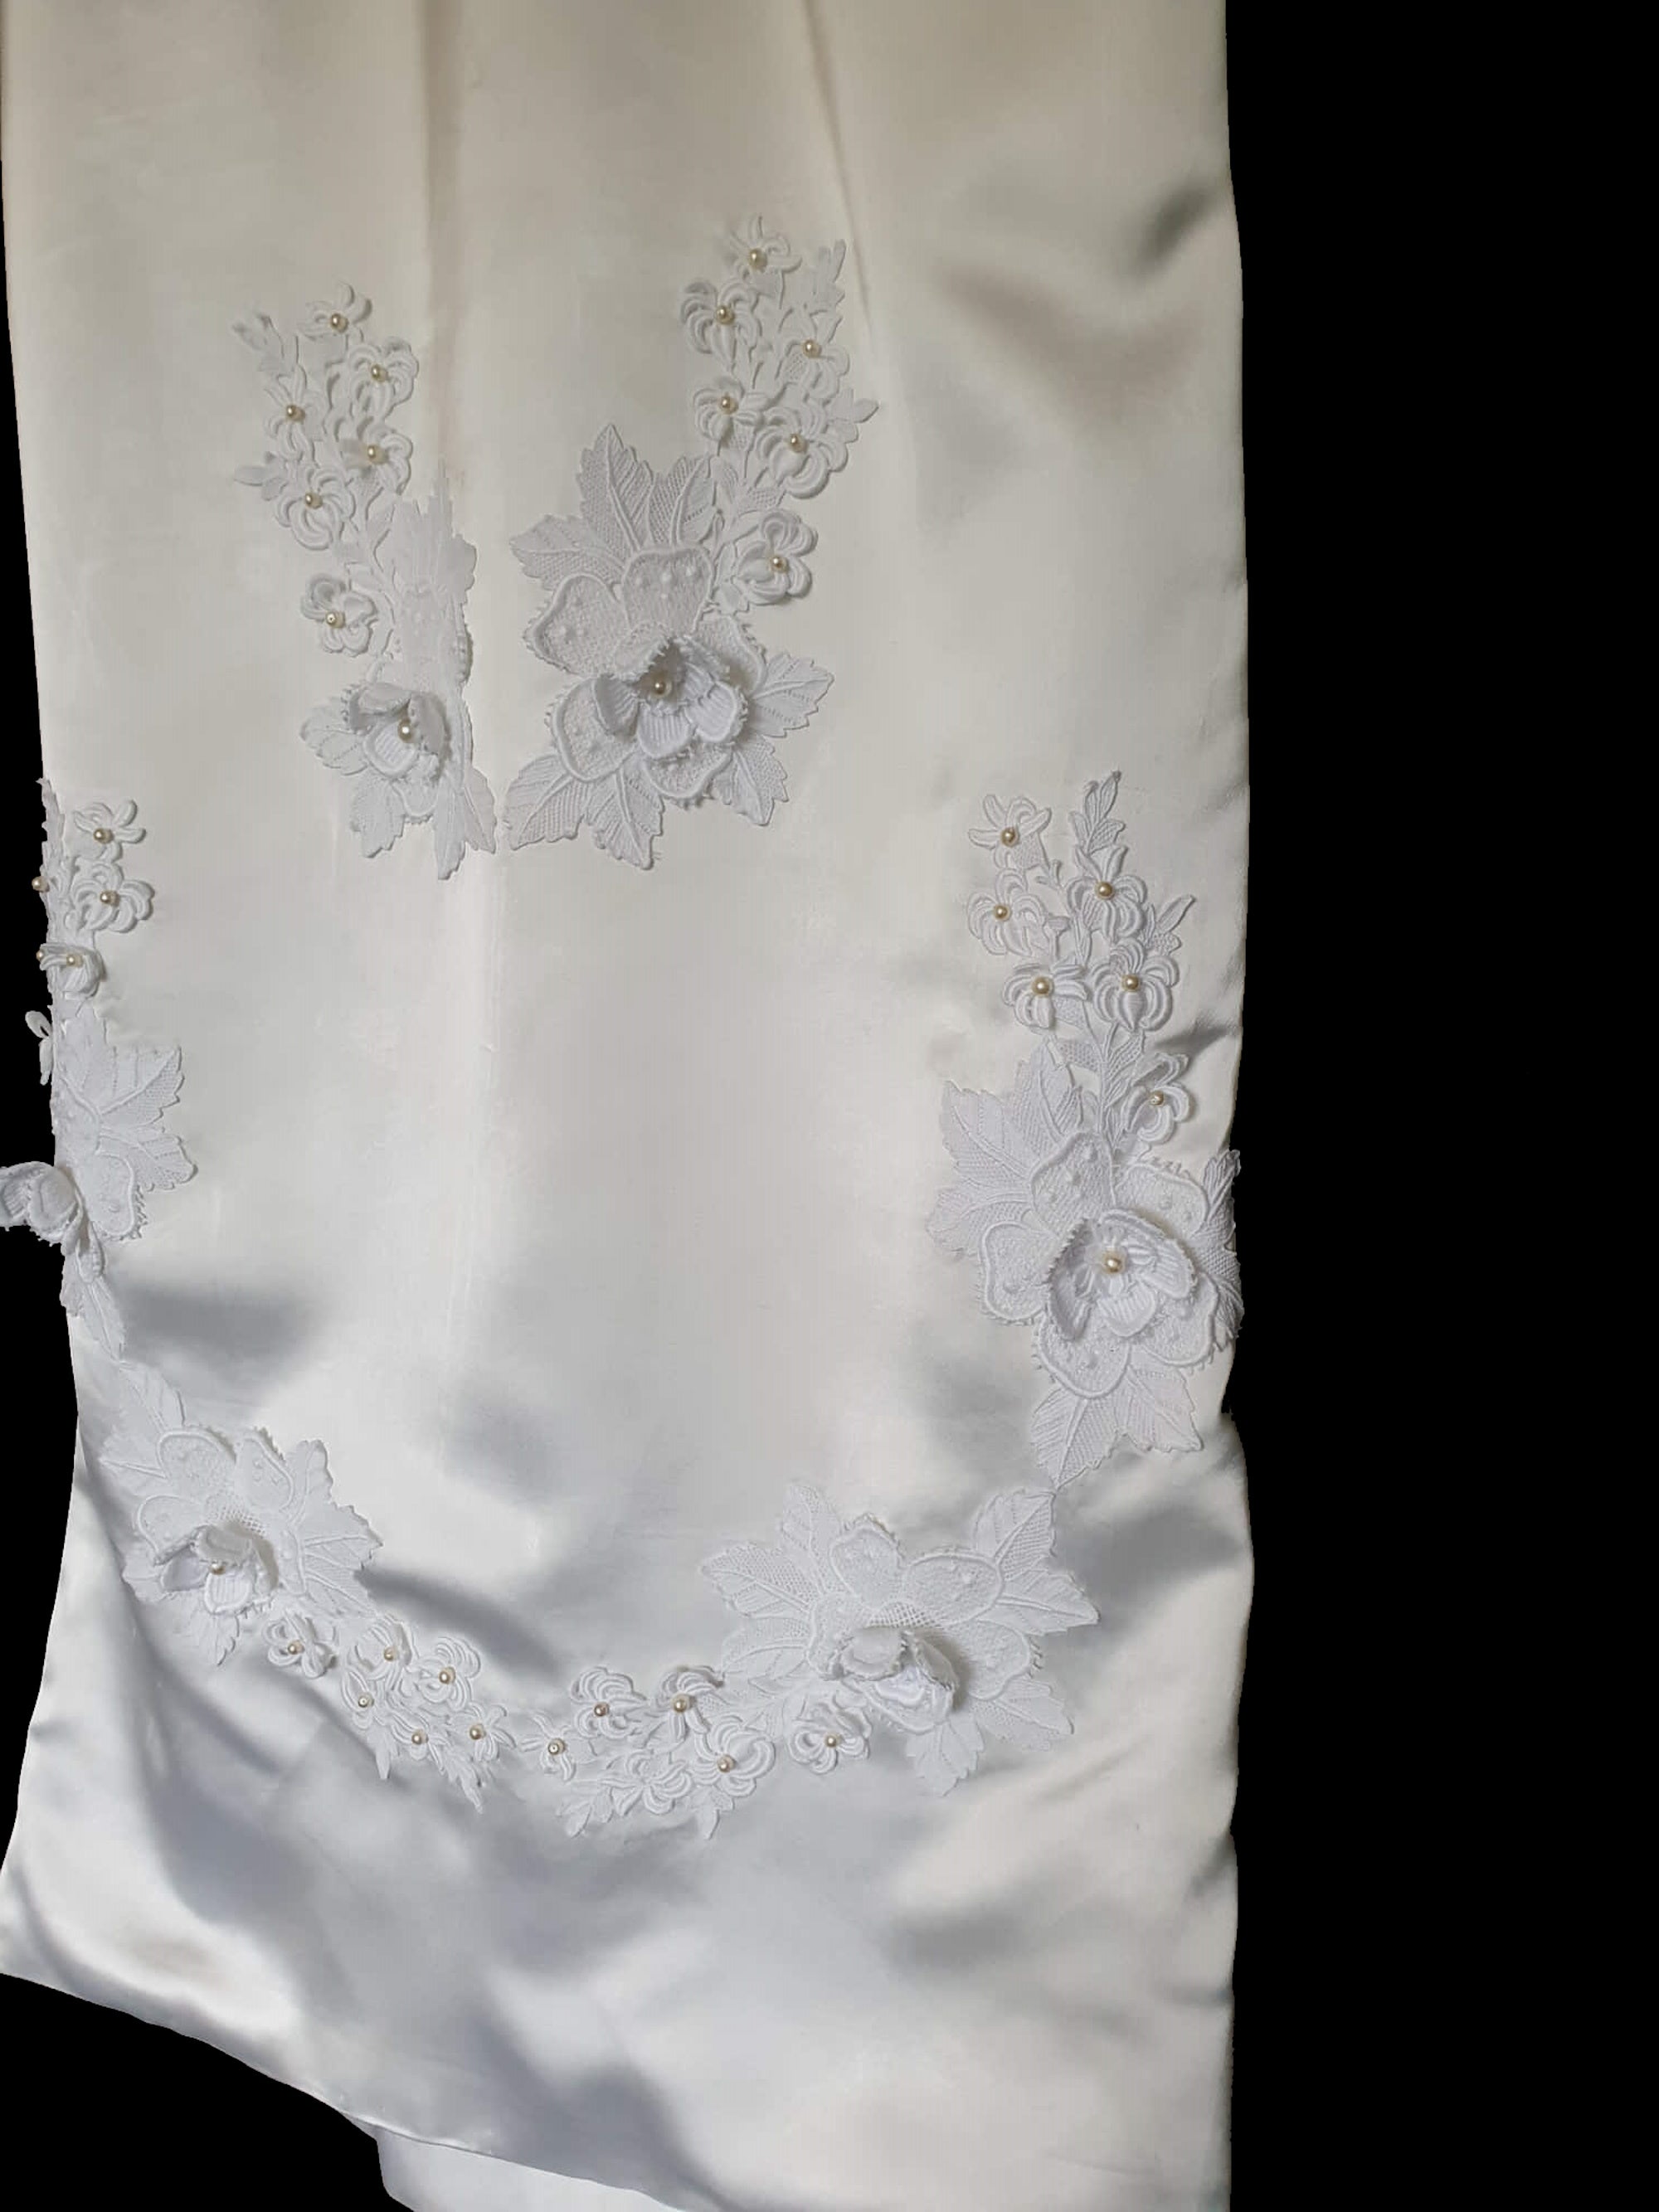 1960s 1970s satin wedding gown with long train embellished with guipure lace and pearl beading Small